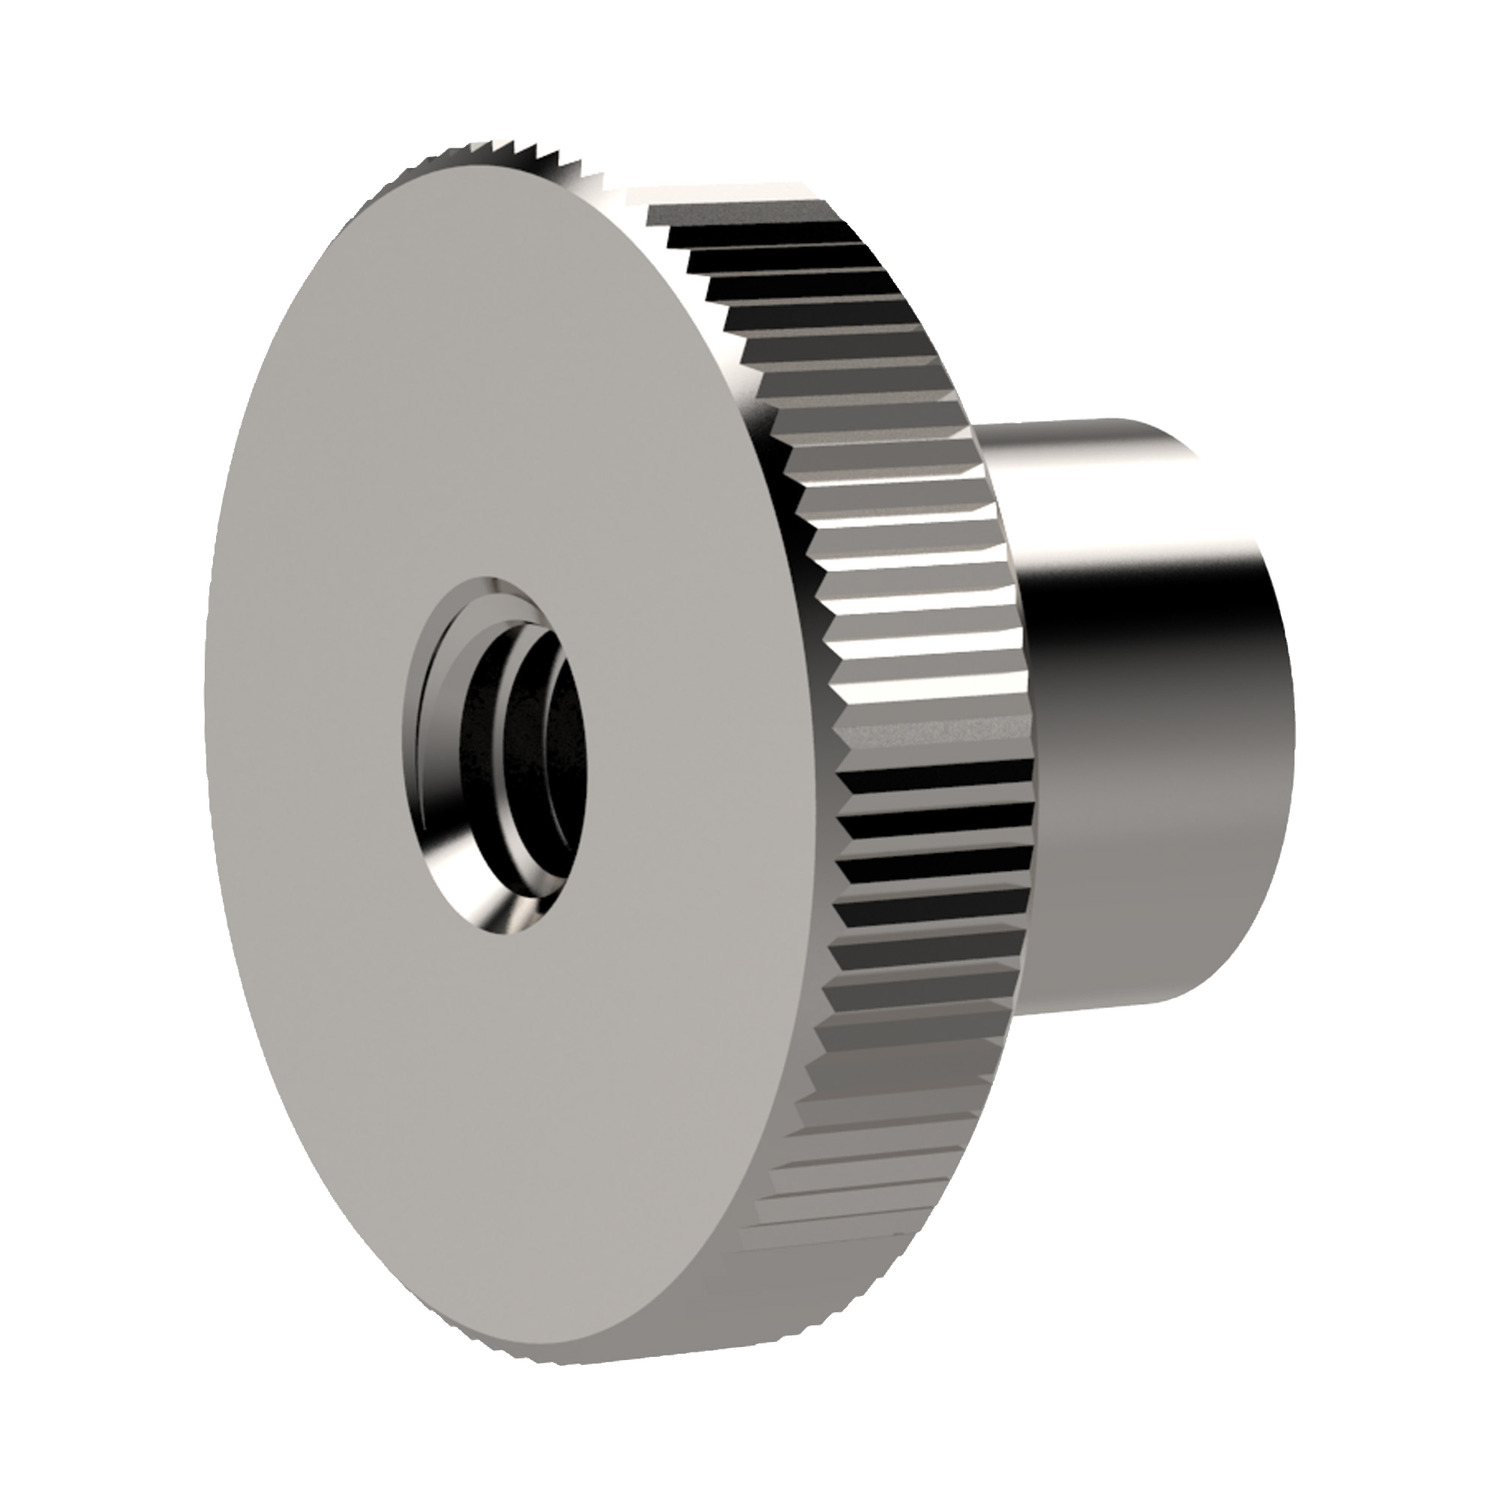 Knurled Nuts Stainless Steel Thumb Nut to DIN 466.